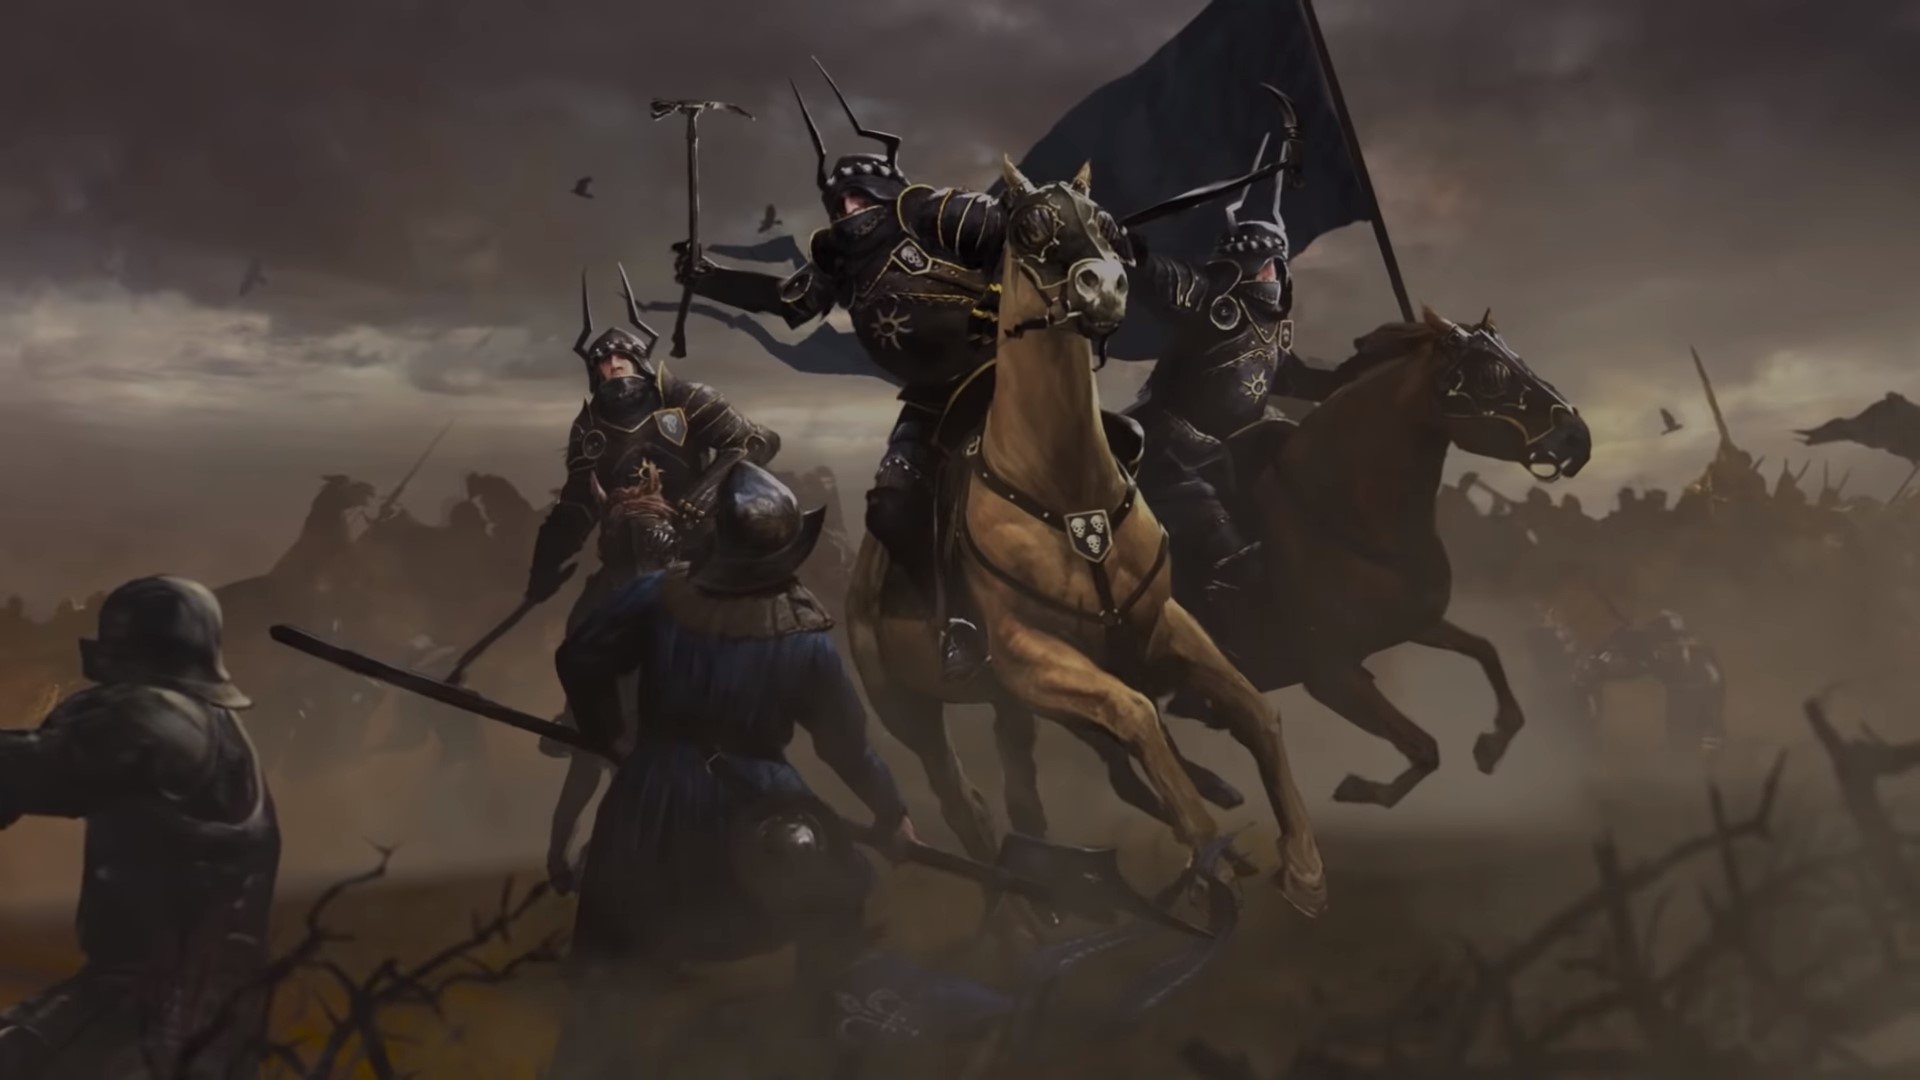 Best mobile multiplayer games: Gwent. Image shows a figure on horseback in a battle.